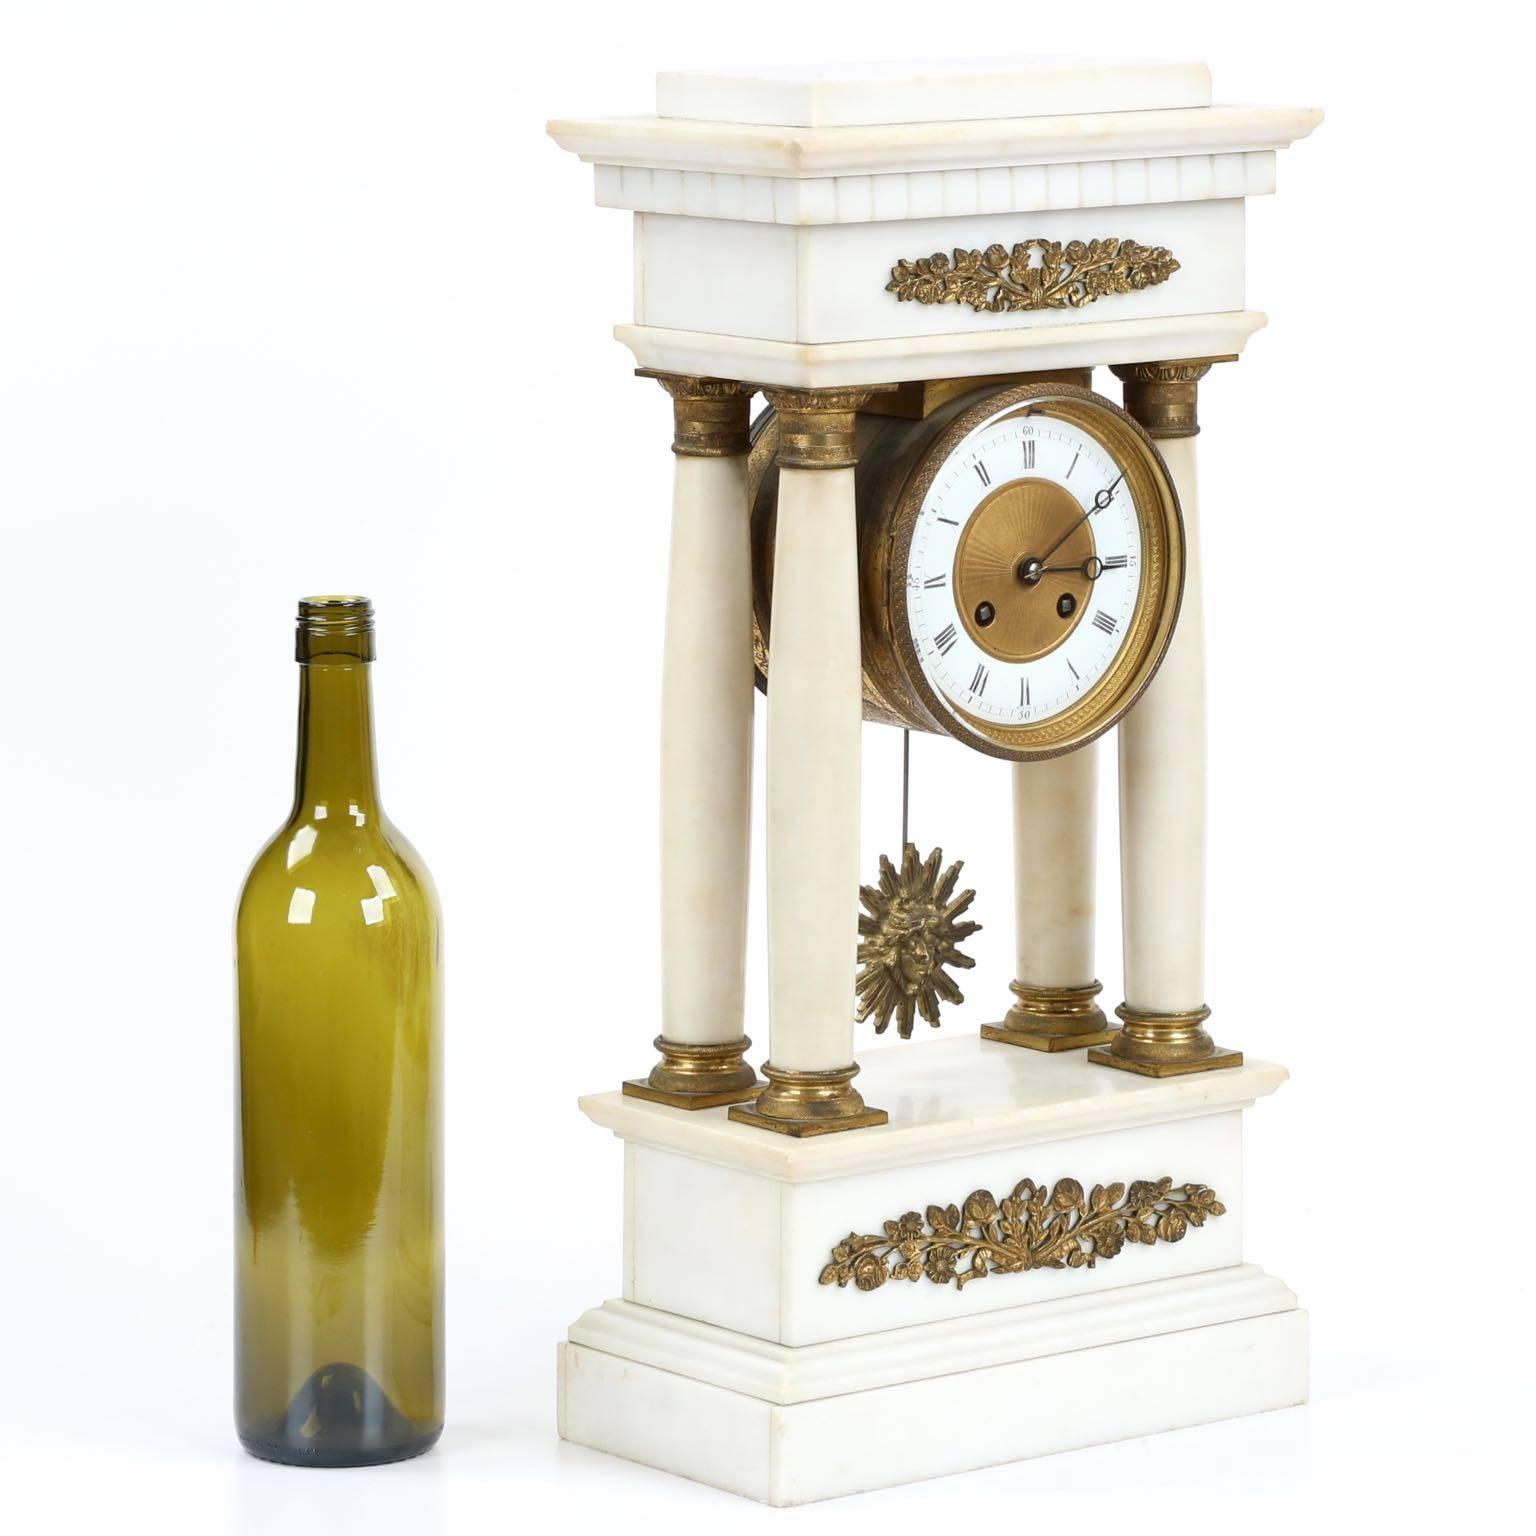 With tasteful embellishments of doré bronze mounts on the pure alabaster surface, this Charles X mantel clock is restrained and most attractive.  The time piece is distinctly architectural in form, a piece inspired by the classical Greek structures